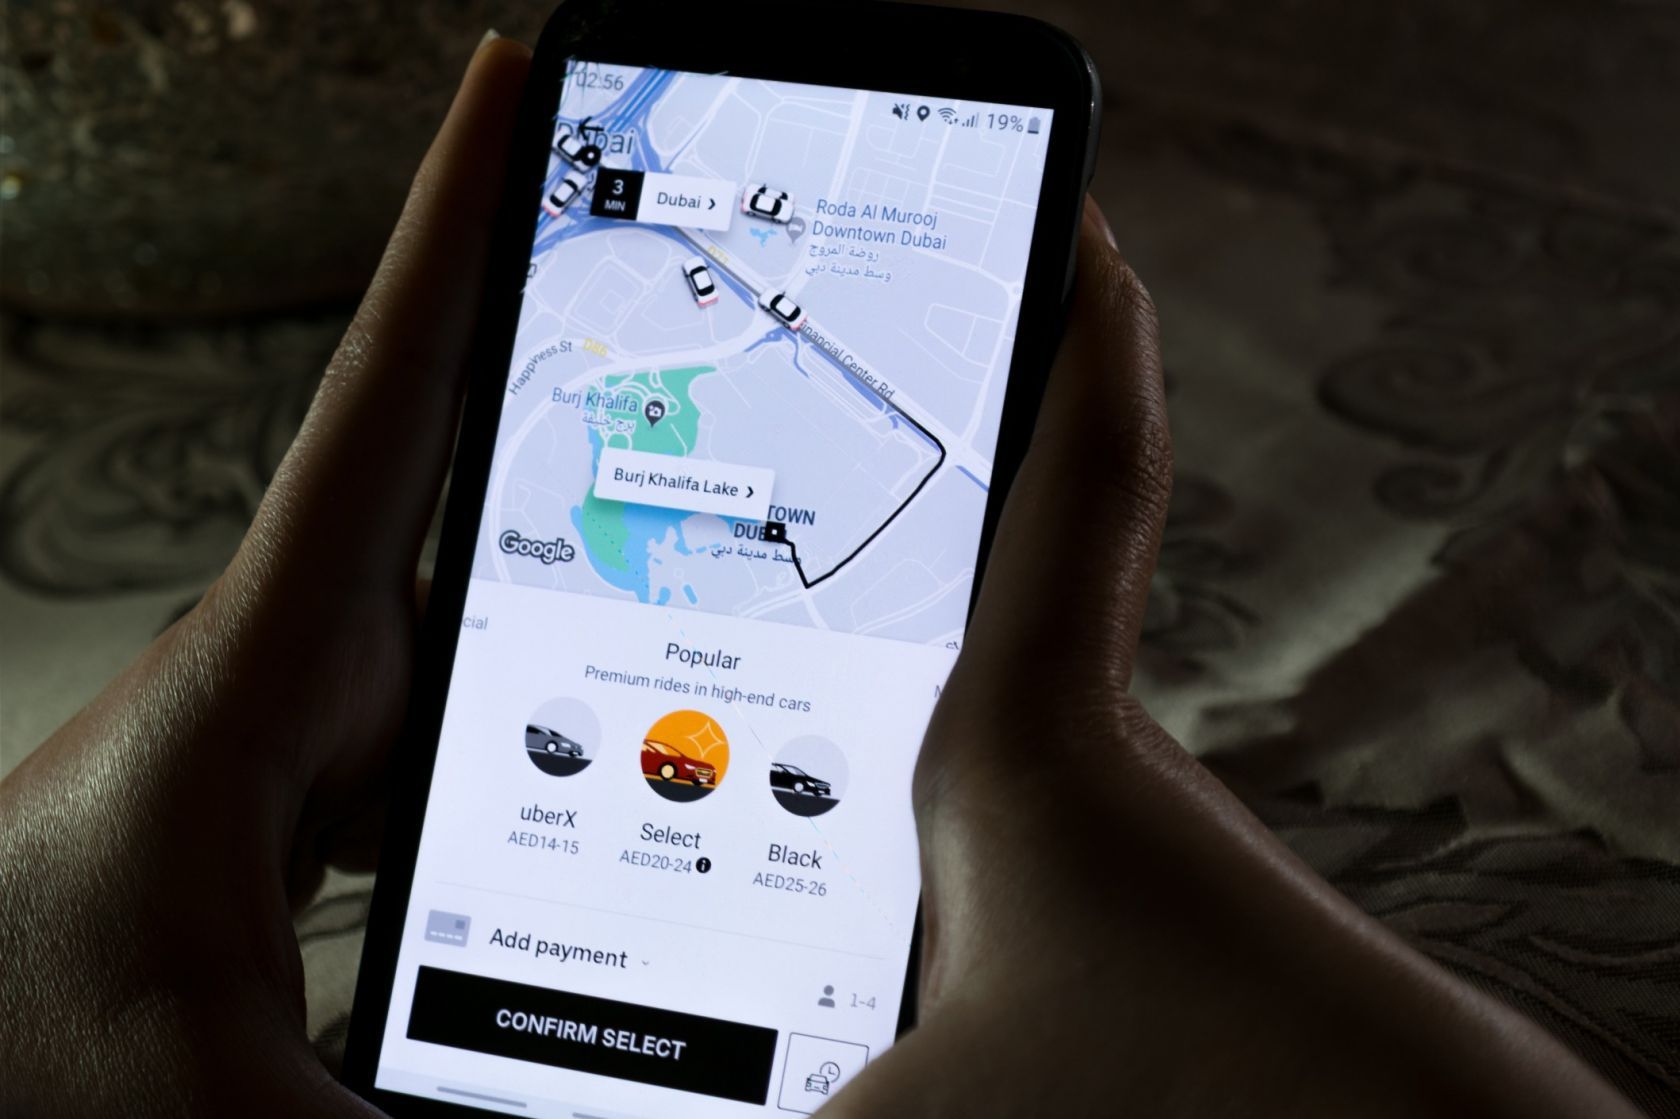 Features of a ride-hailing appis what mainly affectscost